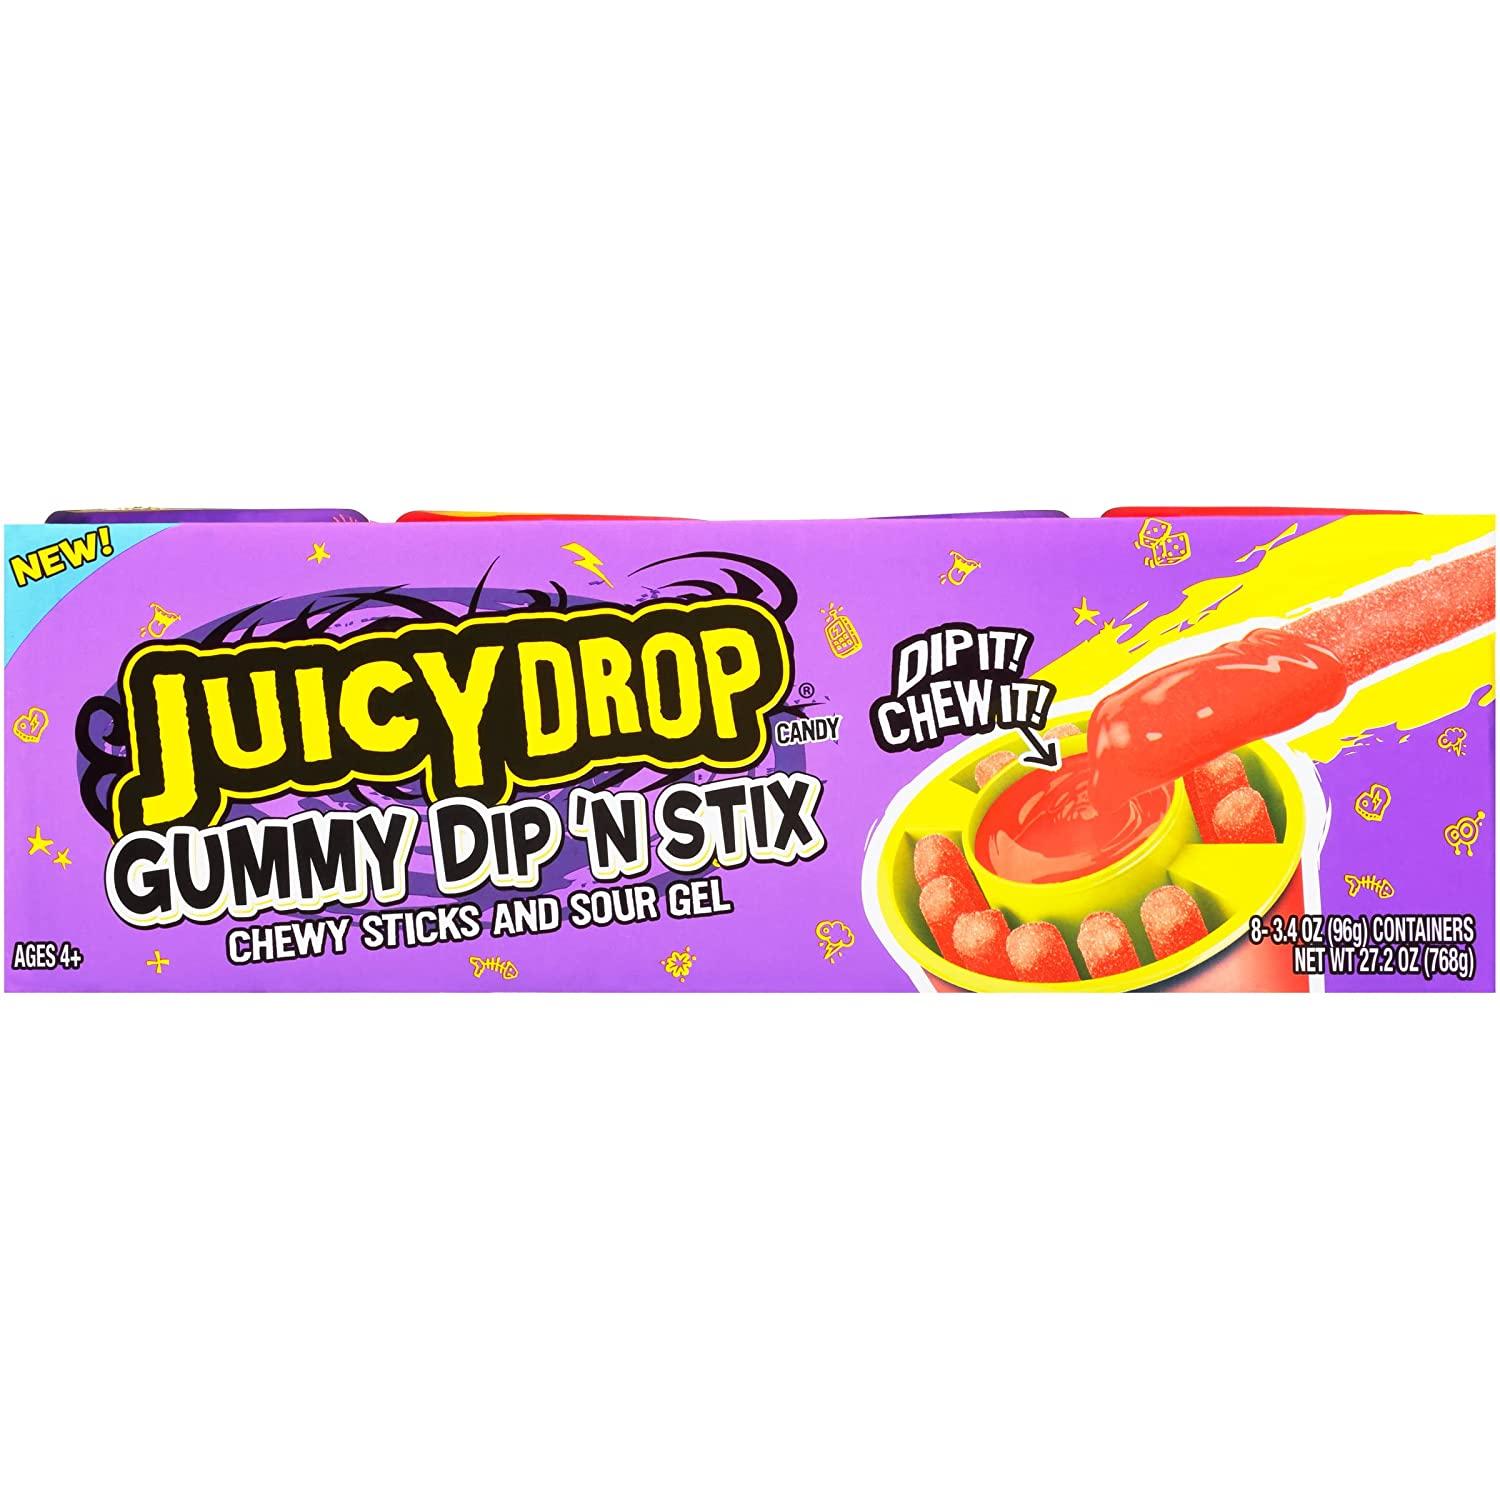 Juicy Drop Re-Mix Sweet & Sour Chewy Candy Variety Pack - Sweet & Sour  Candy Bites in Assorted Fruity Flavors